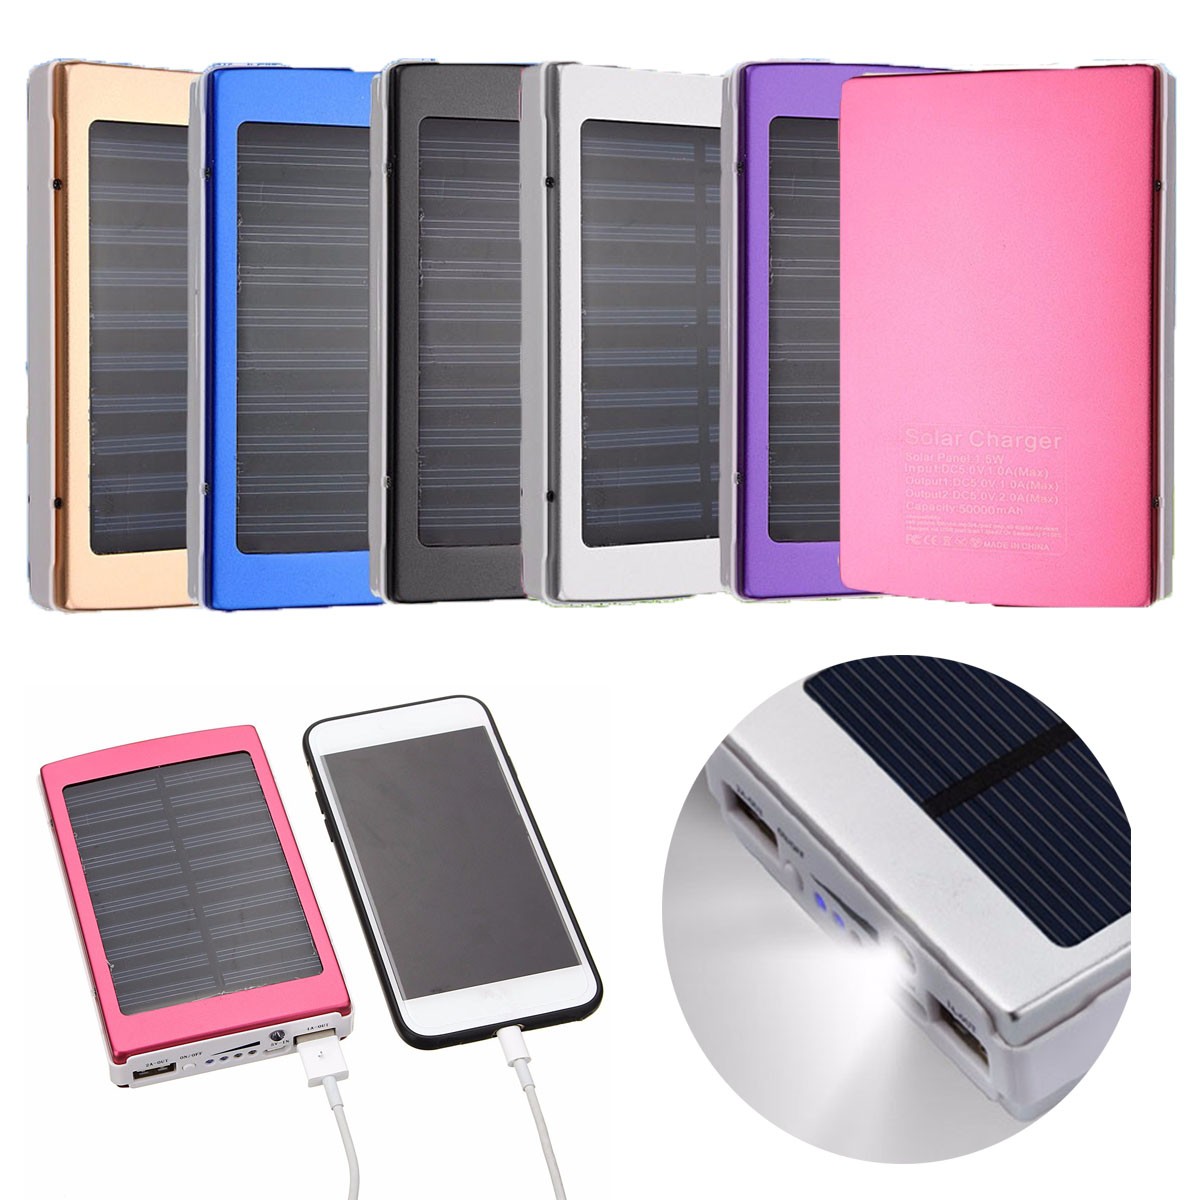 

8000mAh Dual USB Solar External Power Bank Battery Charger Pack For iPhone 7 Plus Xiaomi Smartphone